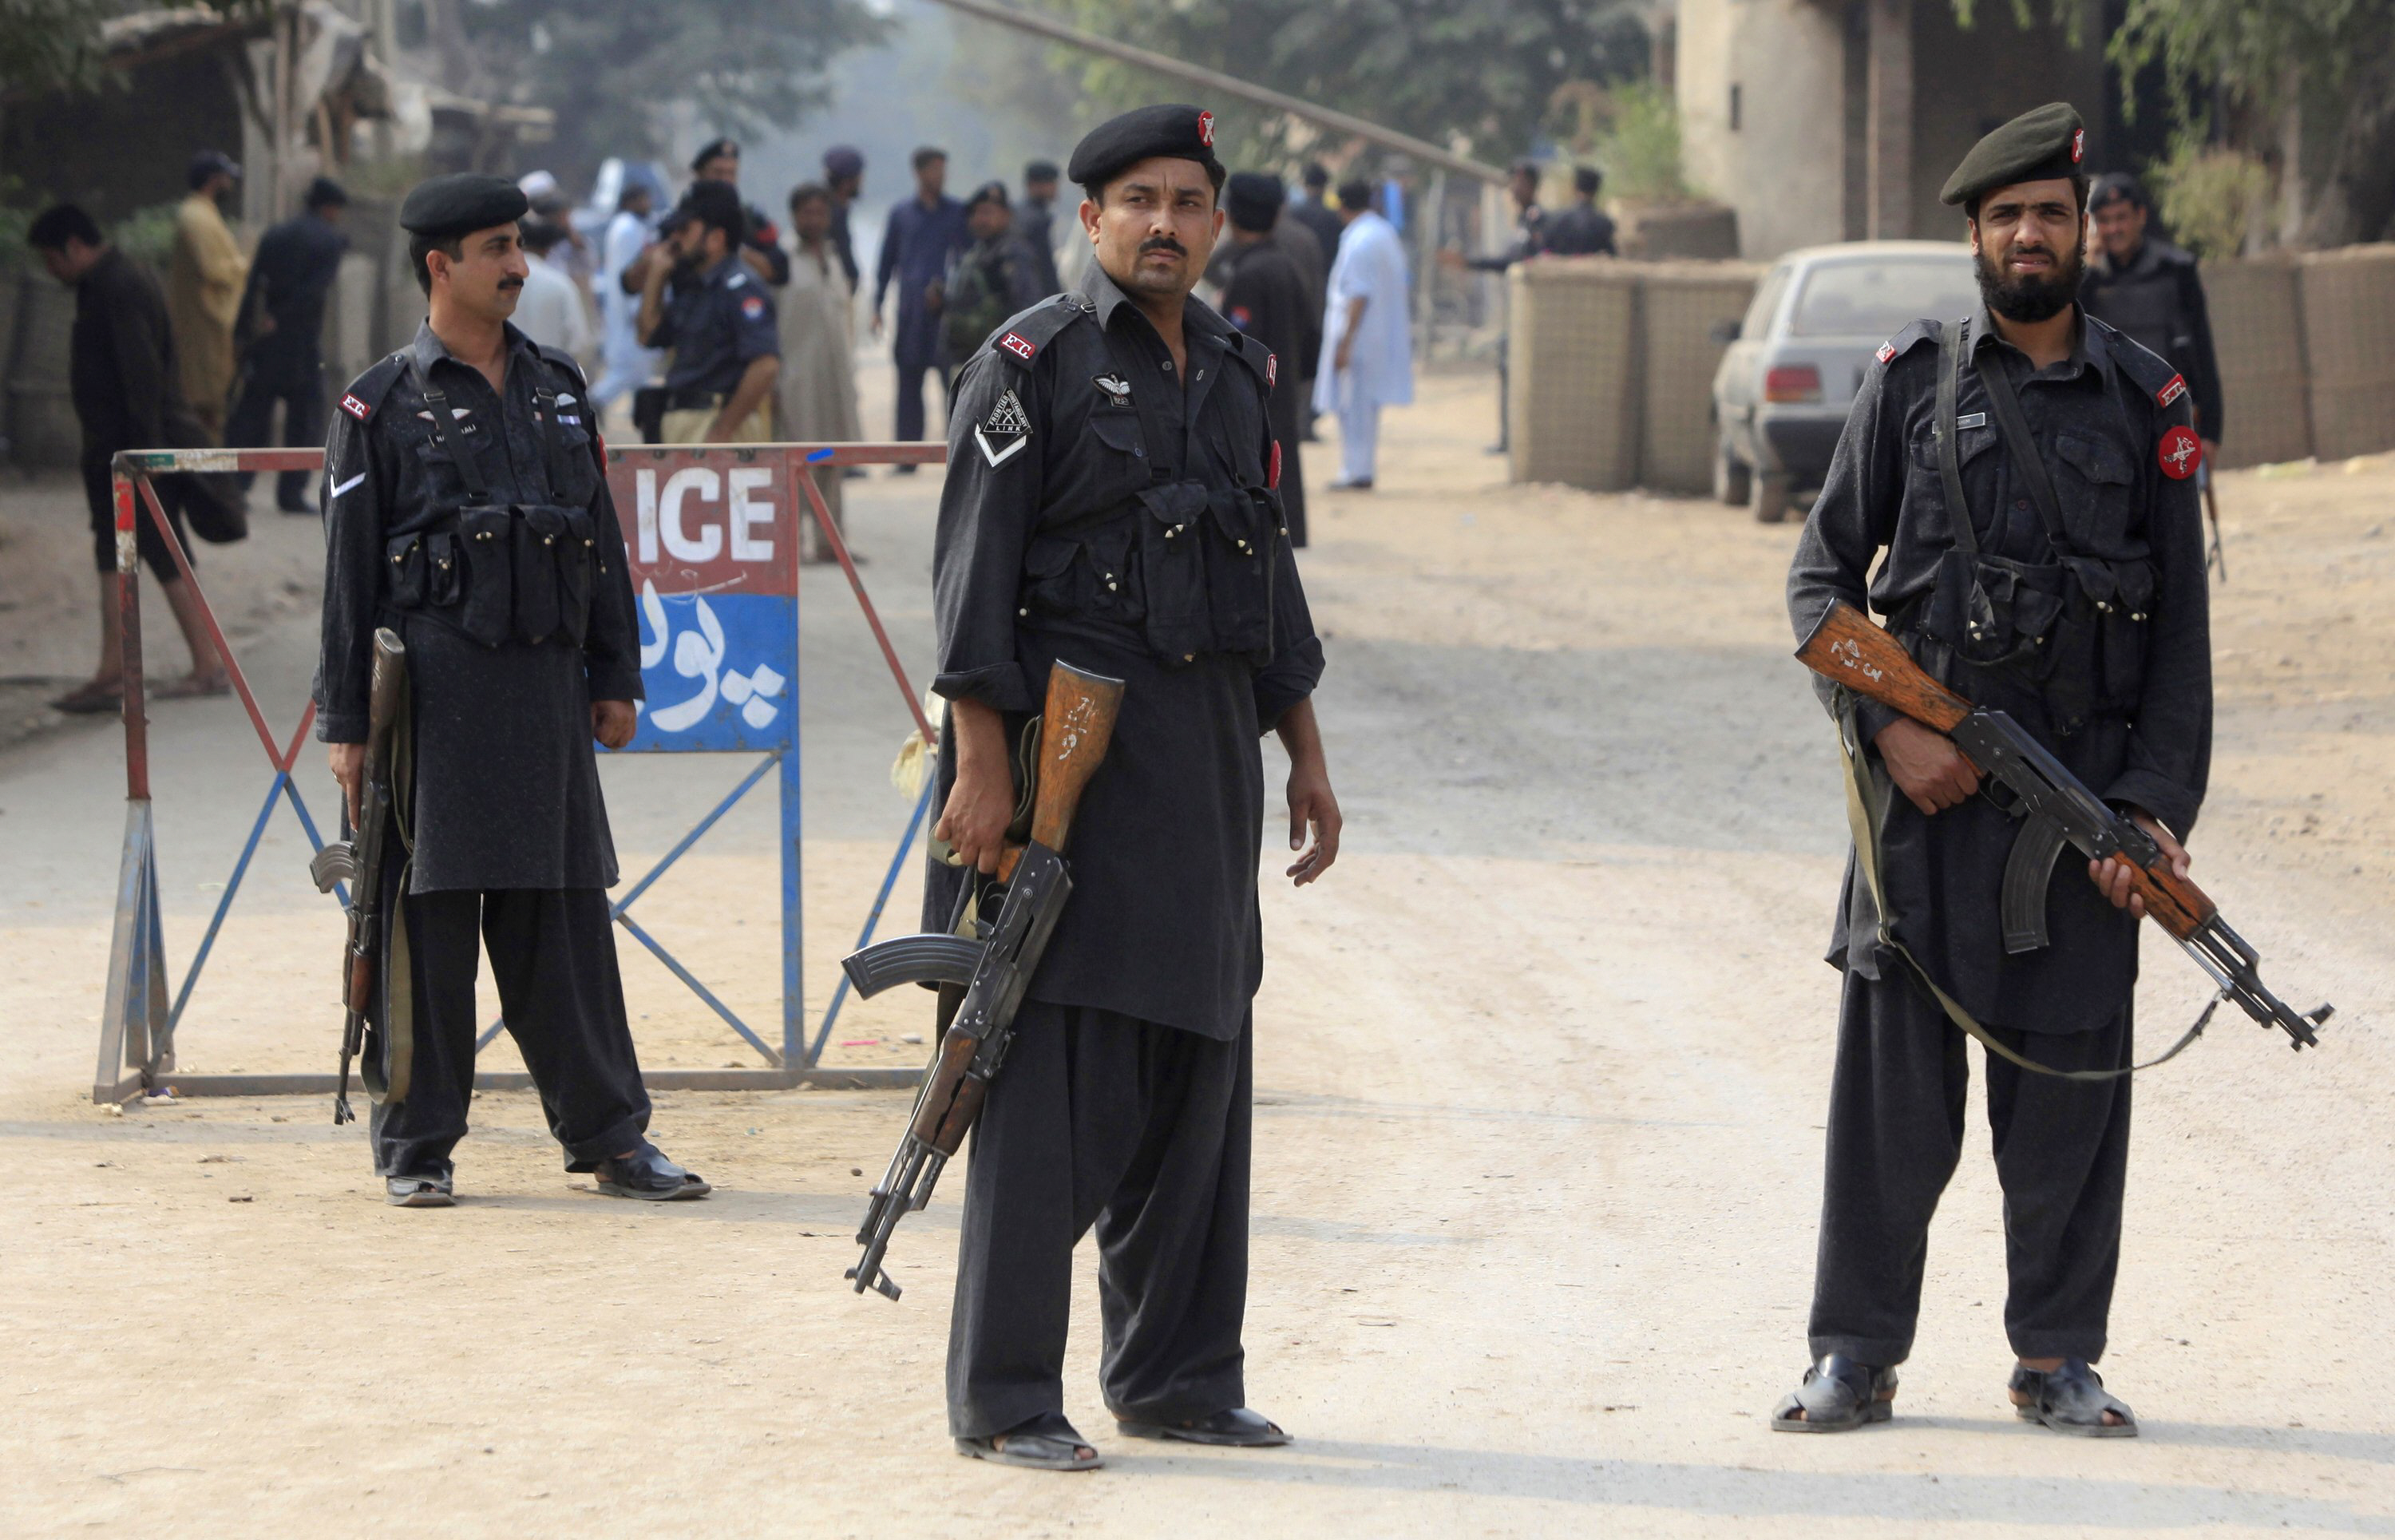 police stand guard near a barricade on a road in the khyber pakhtunkhwa province photo reuters file